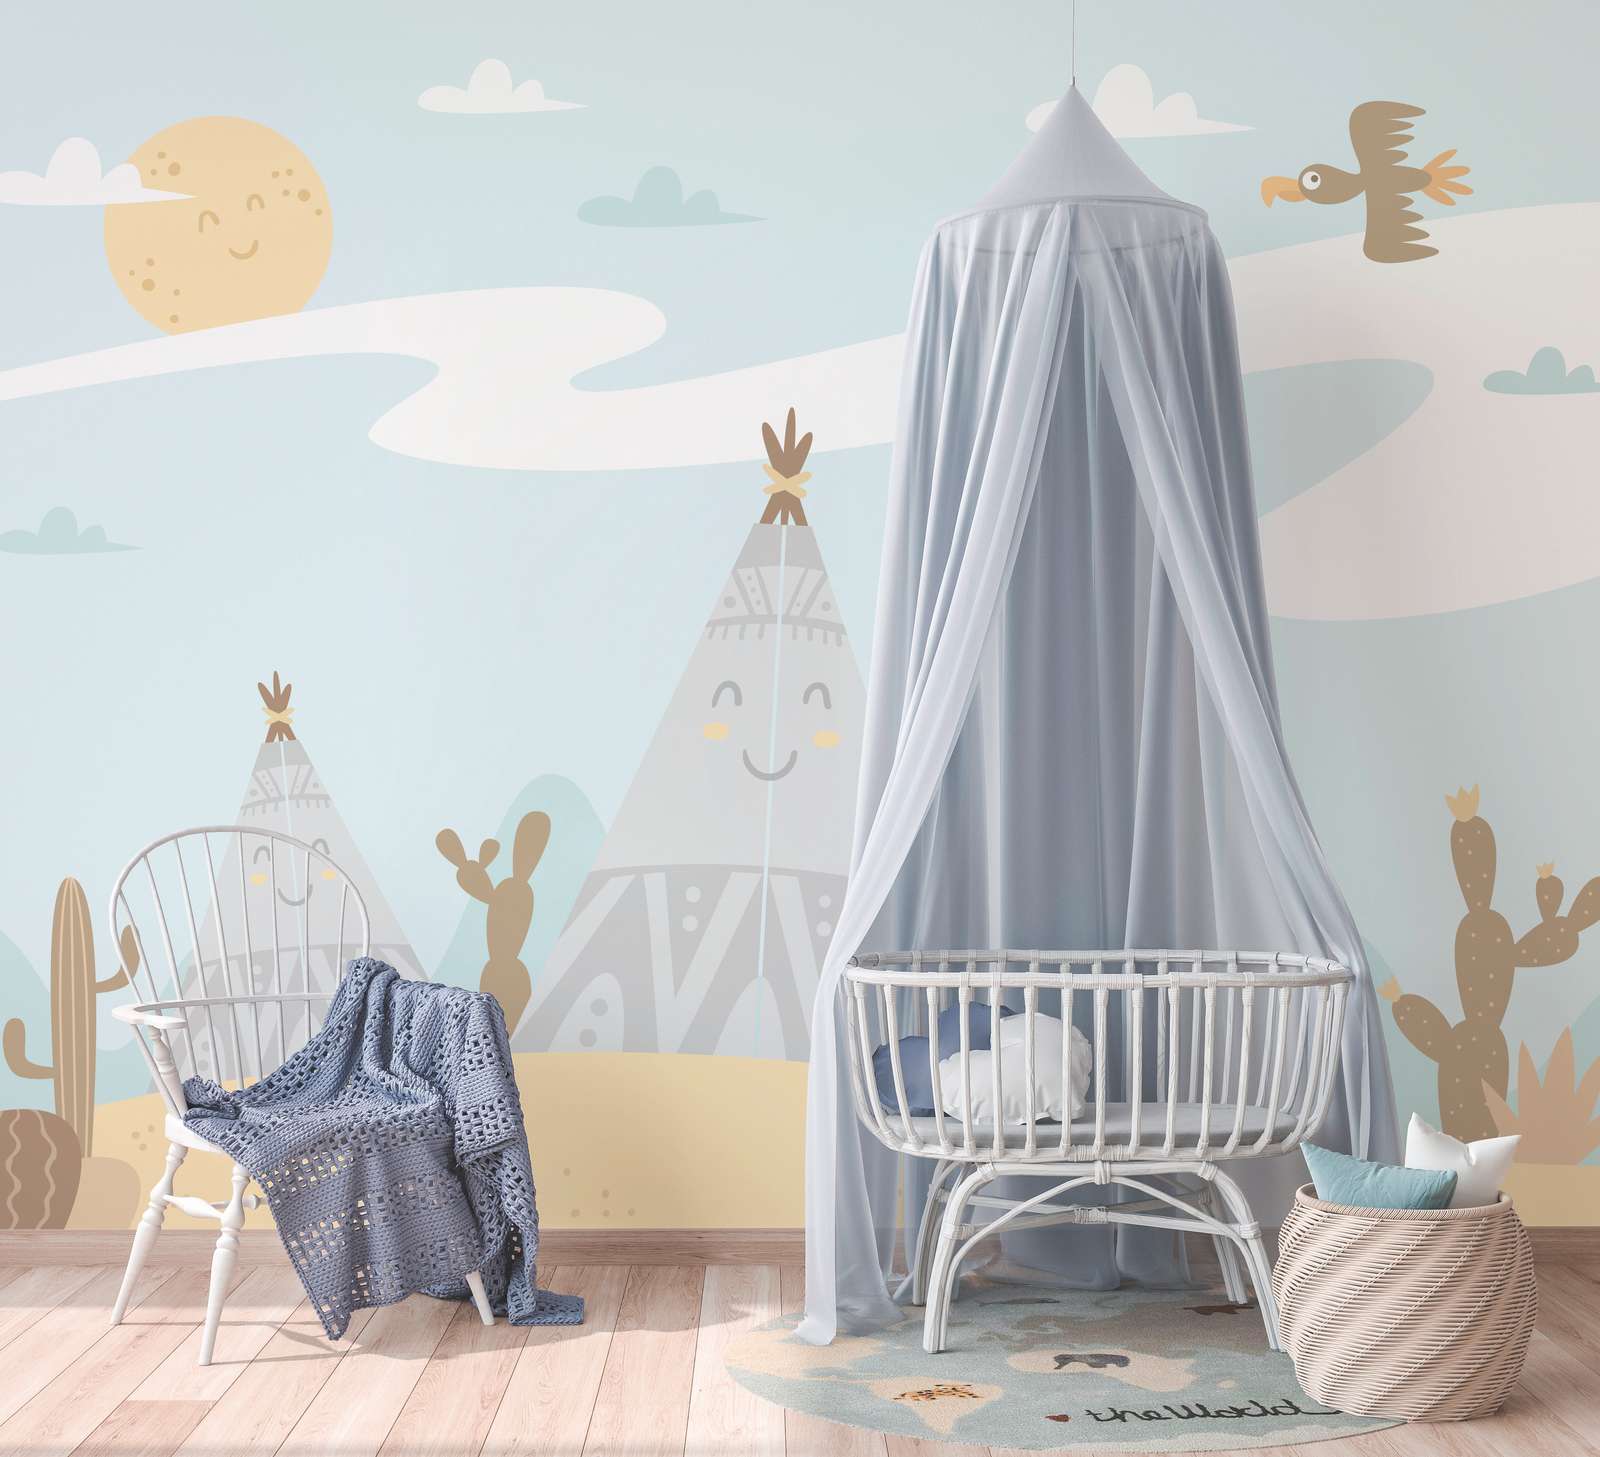             Nursery Wallpaper Desert with Tippies and Cacti - Blue, Yellow, Brown
        